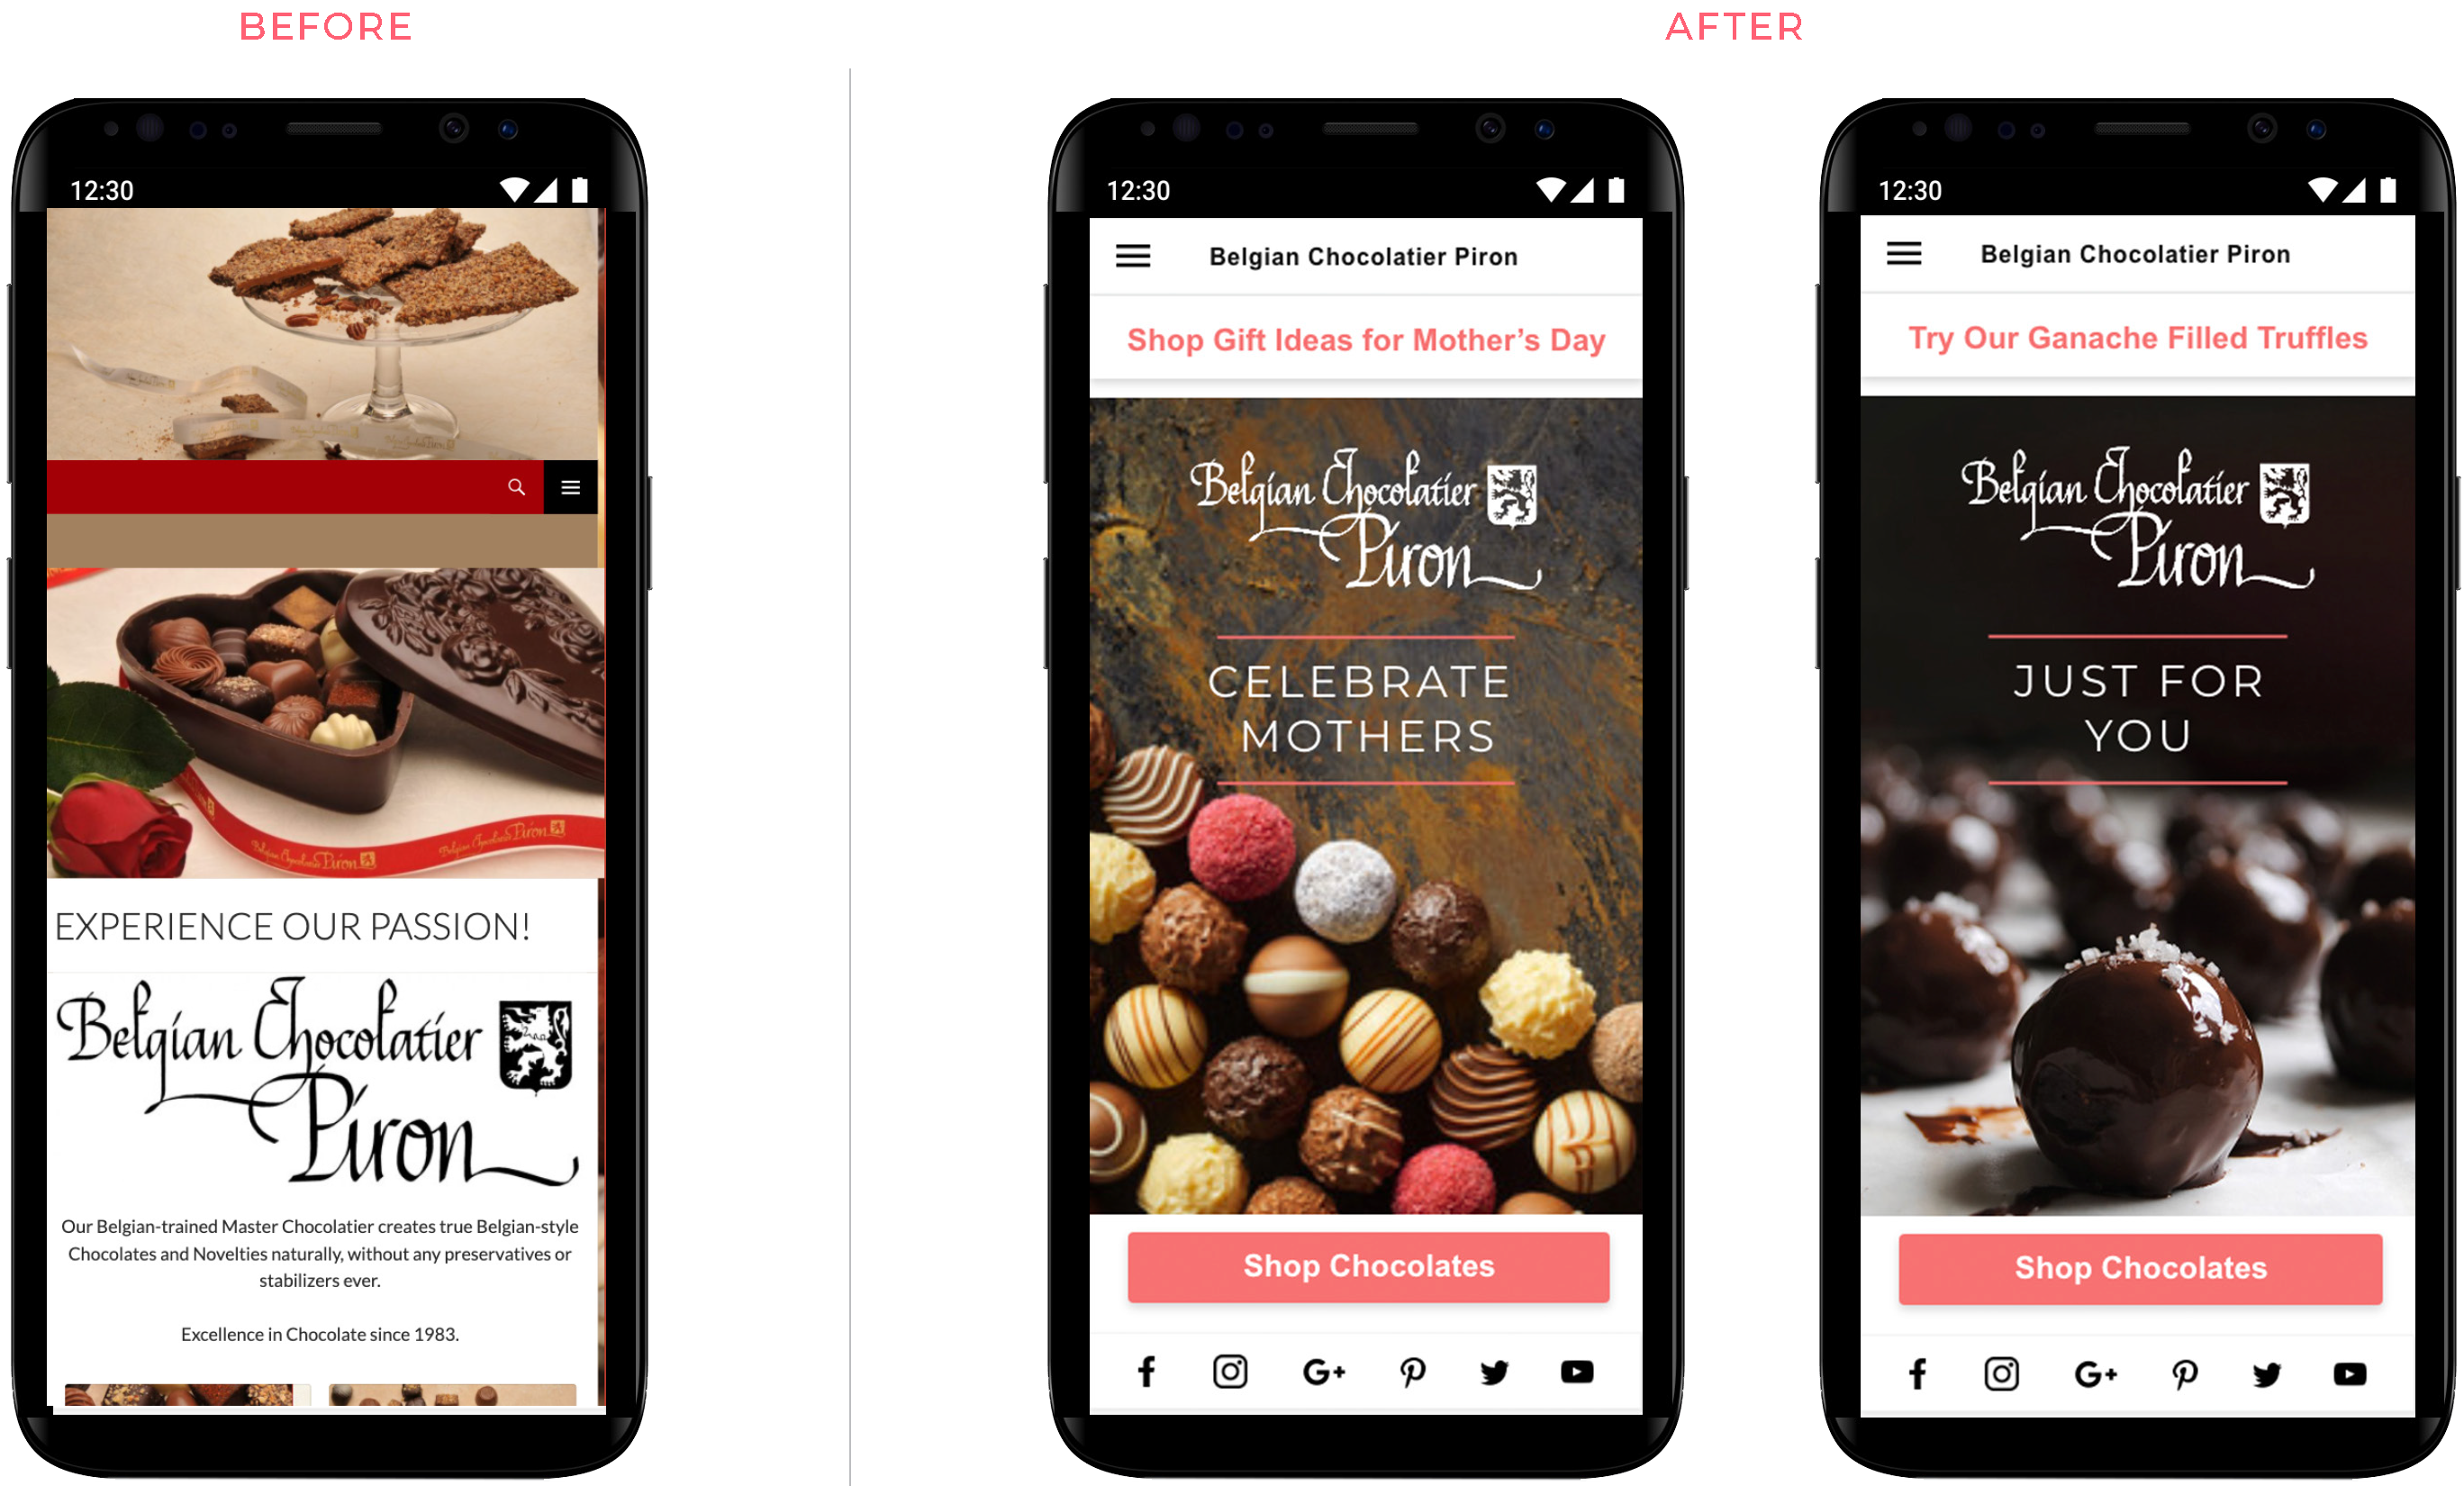 Belgian Chocolate Piron mobile home page